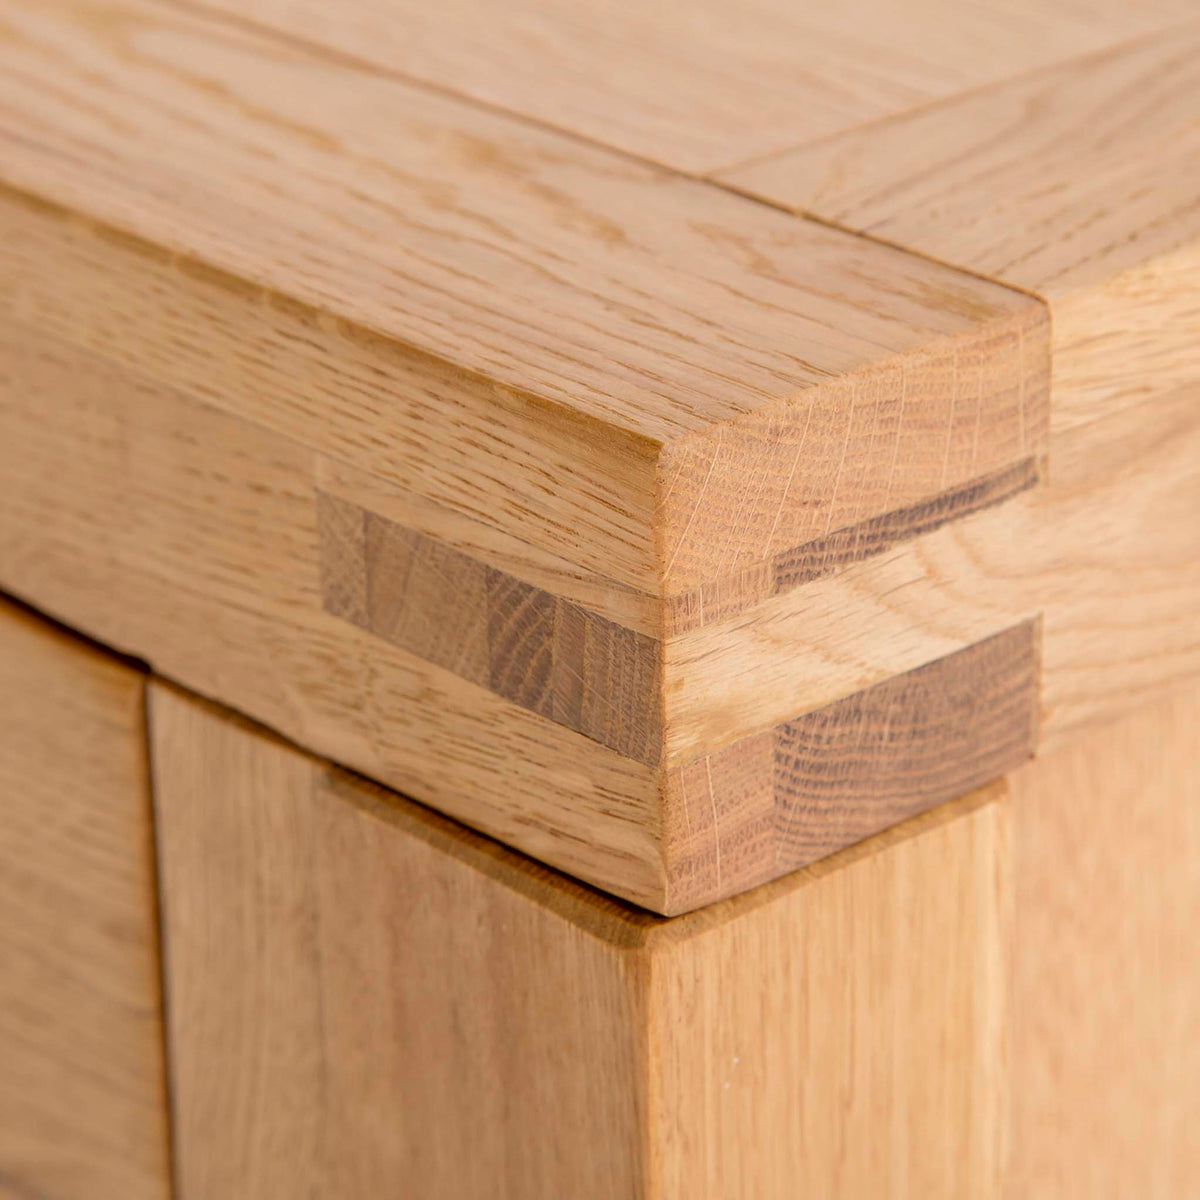  Abbey Waxed Oak Console Table with Drawer - Close up of tenon joint